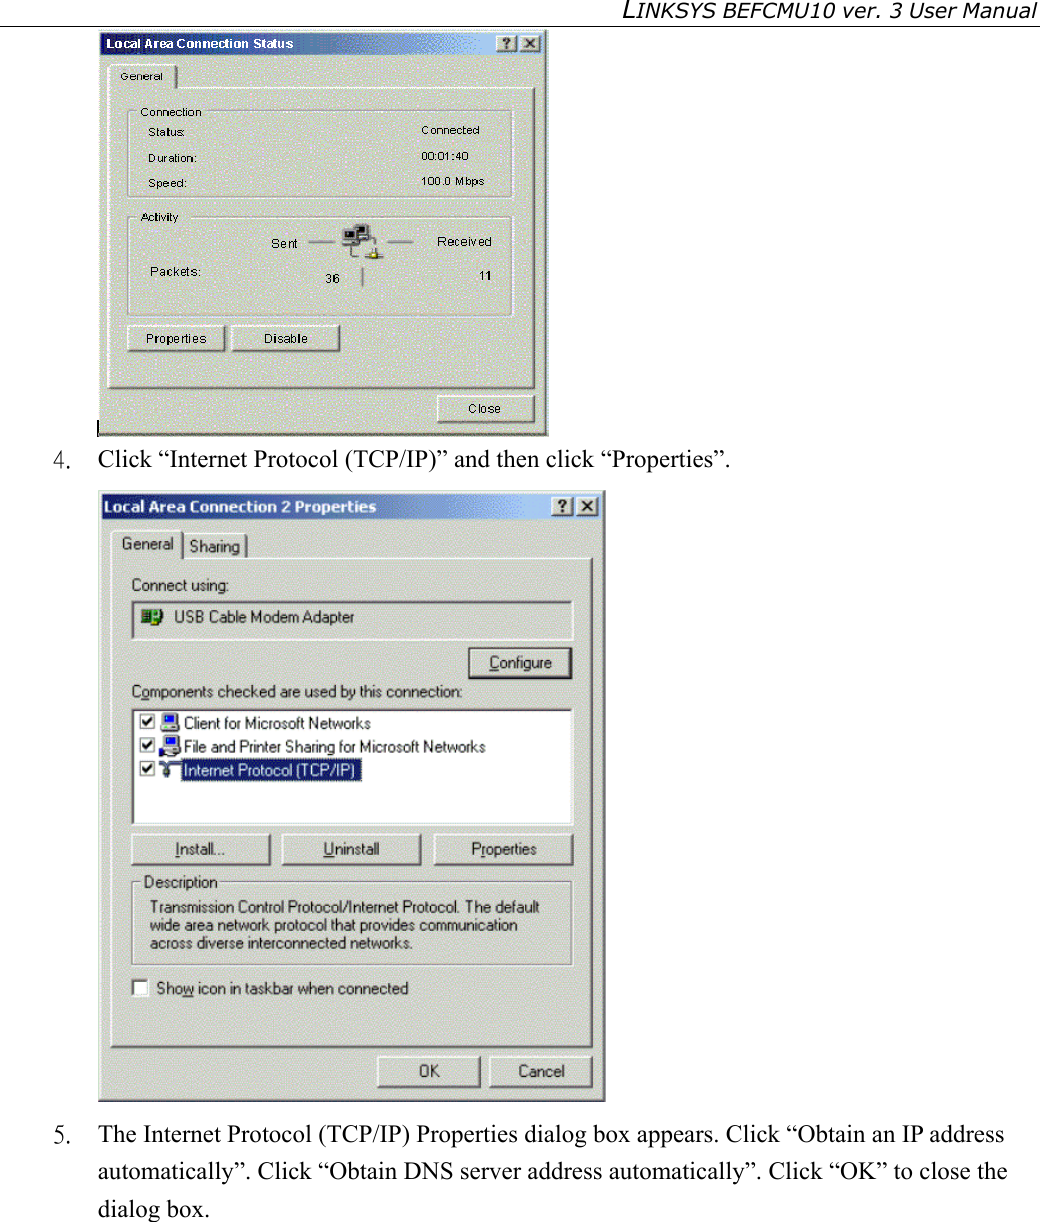 LINKSYS BEFCMU10 ver. 3 User Manual    4.  Click “Internet Protocol (TCP/IP)” and then click “Properties”.  5.  The Internet Protocol (TCP/IP) Properties dialog box appears. Click “Obtain an IP address automatically”. Click “Obtain DNS server address automatically”. Click “OK” to close the dialog box. 